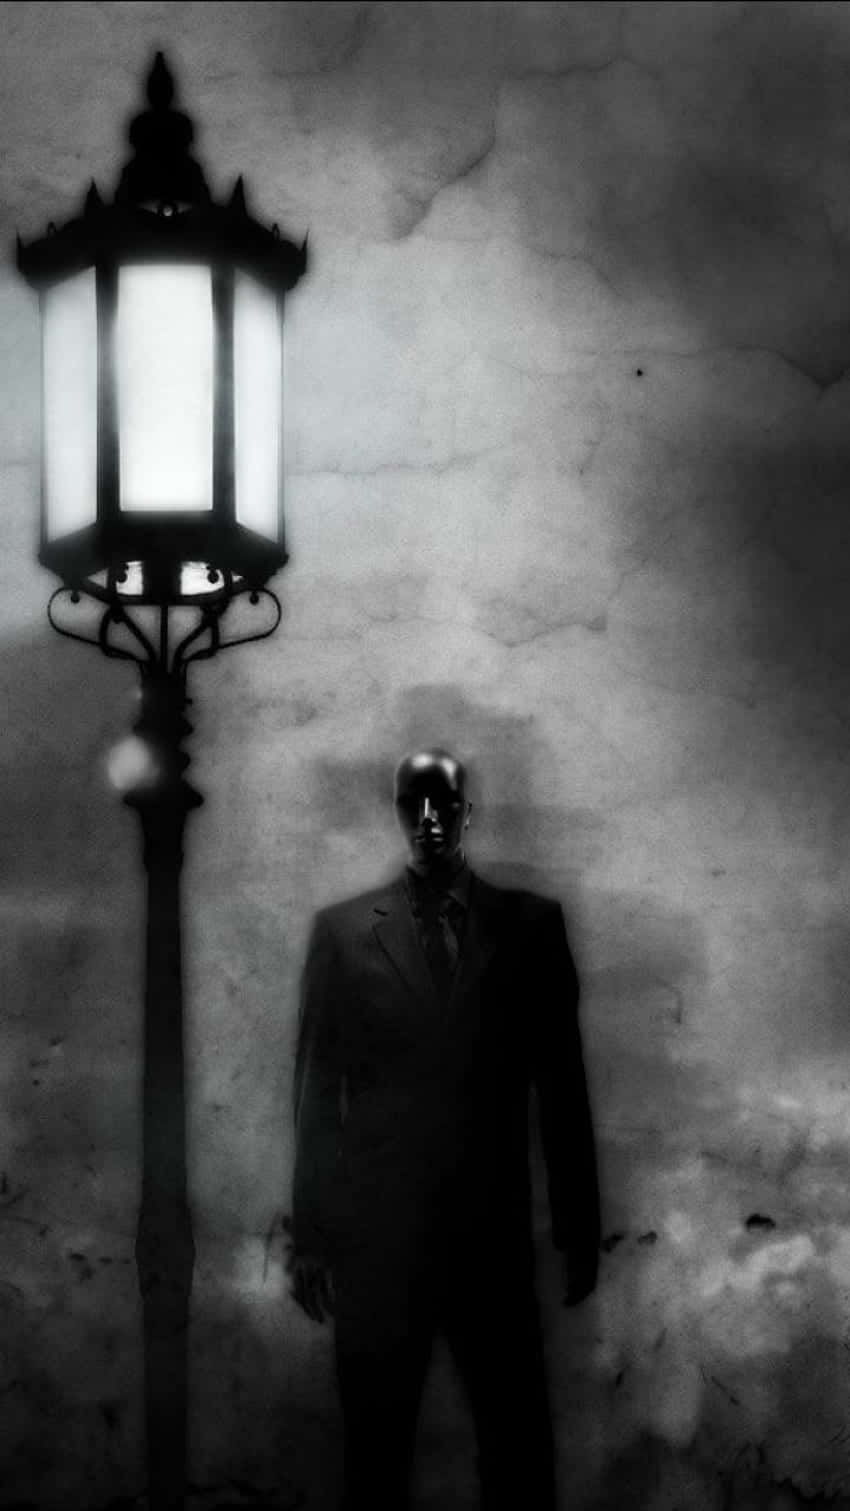 A man in suit standing by the street lamp - Horror, creepy